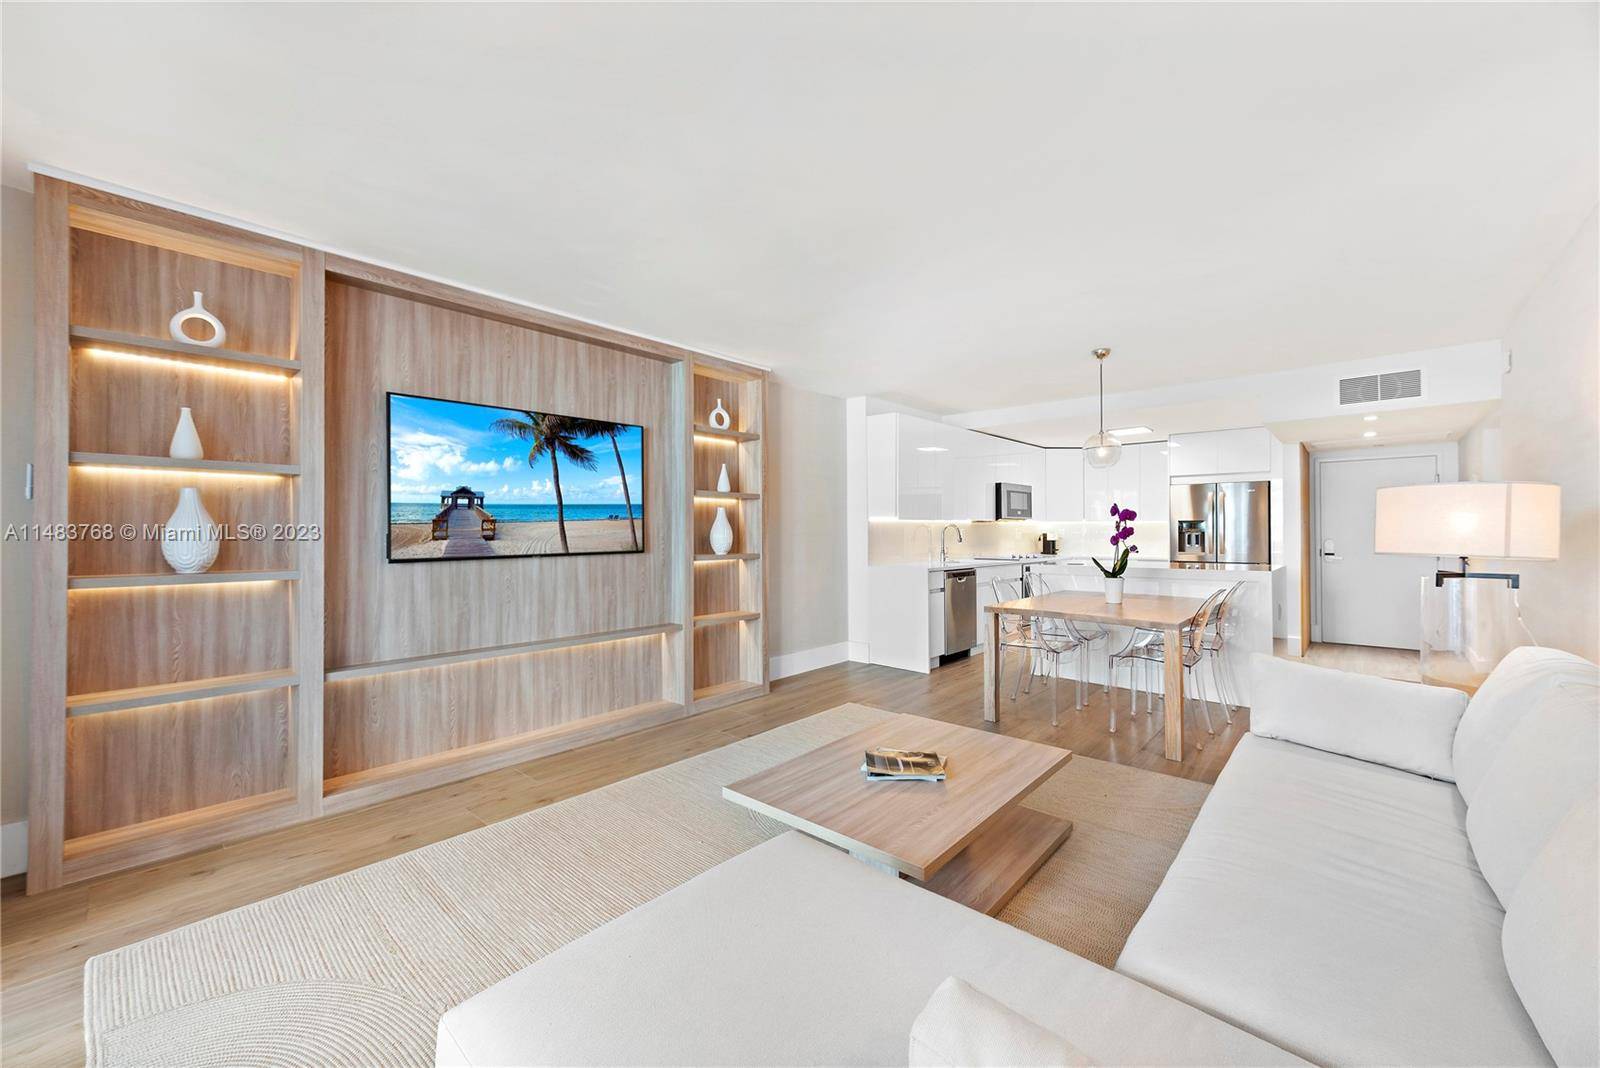 Inspired by a sophisticated beach retreat, this stunning 1 bed 1 bath with 900 SF was meticulously designed with customized cabinetry, built ins, natural wood accents, an open kitchen with ...